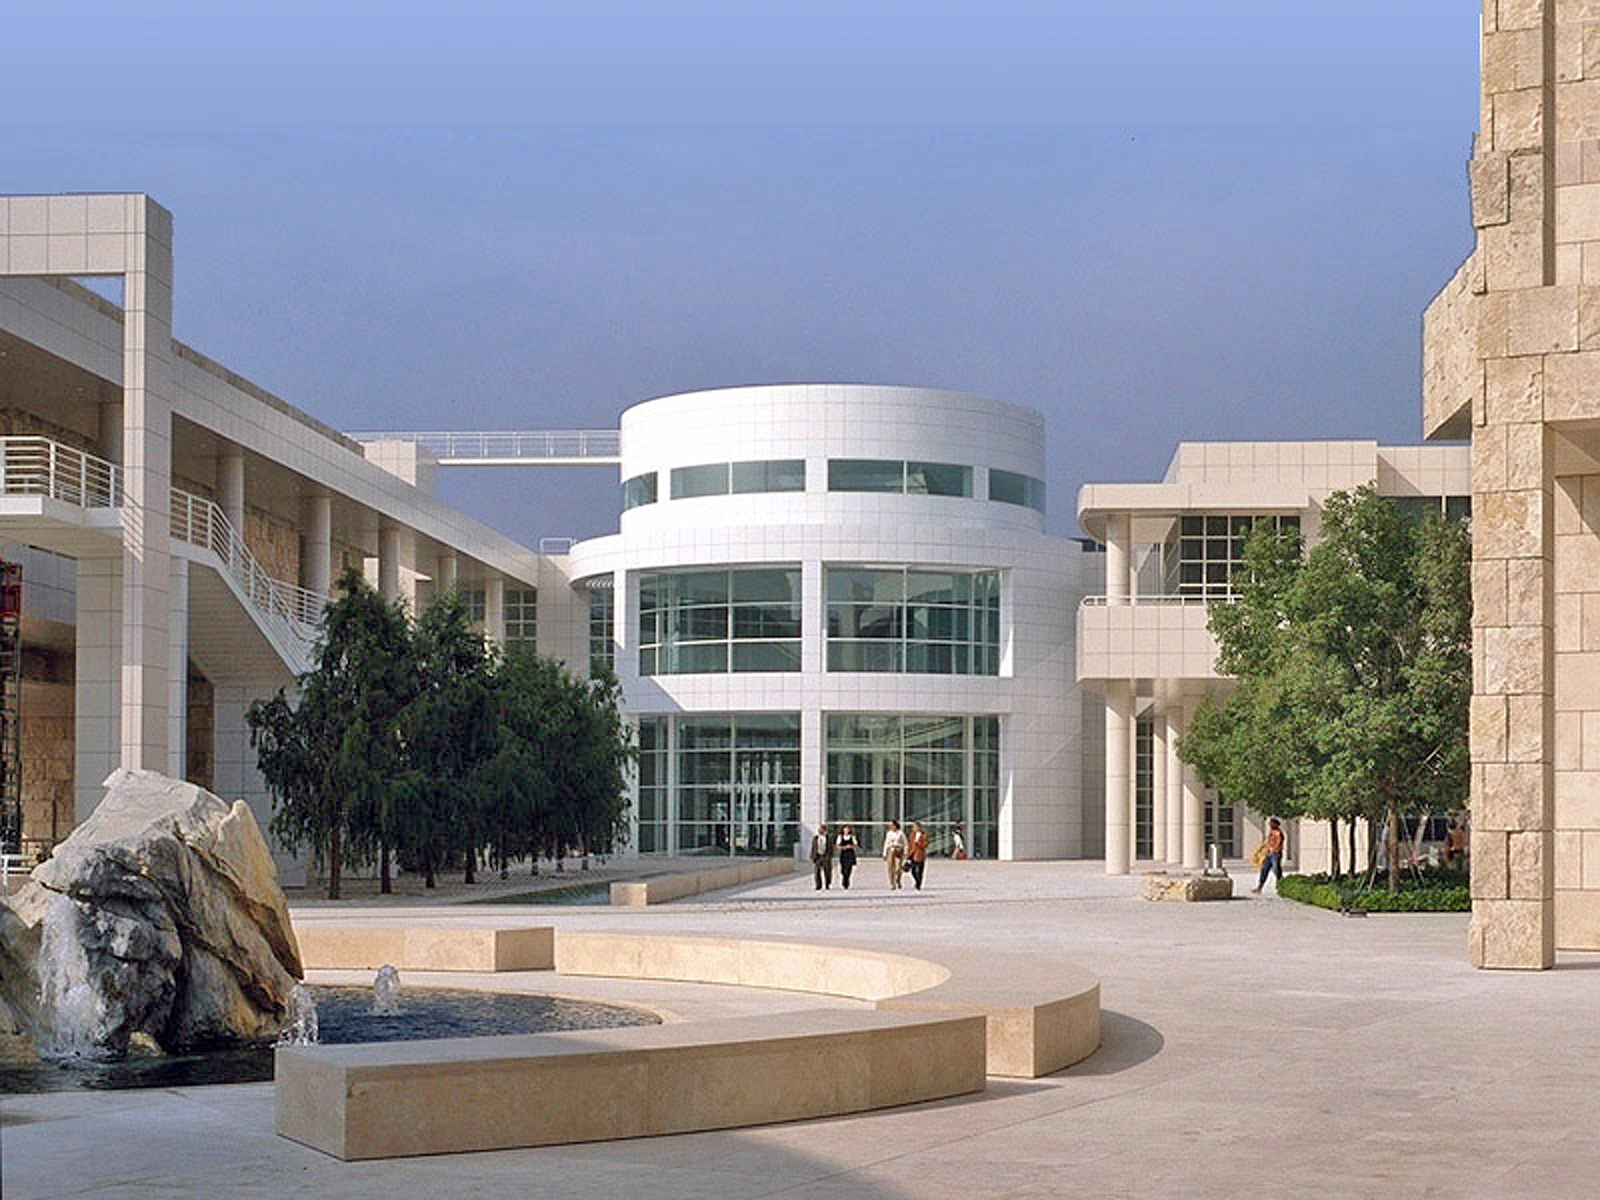 Architecture of the Getty Center